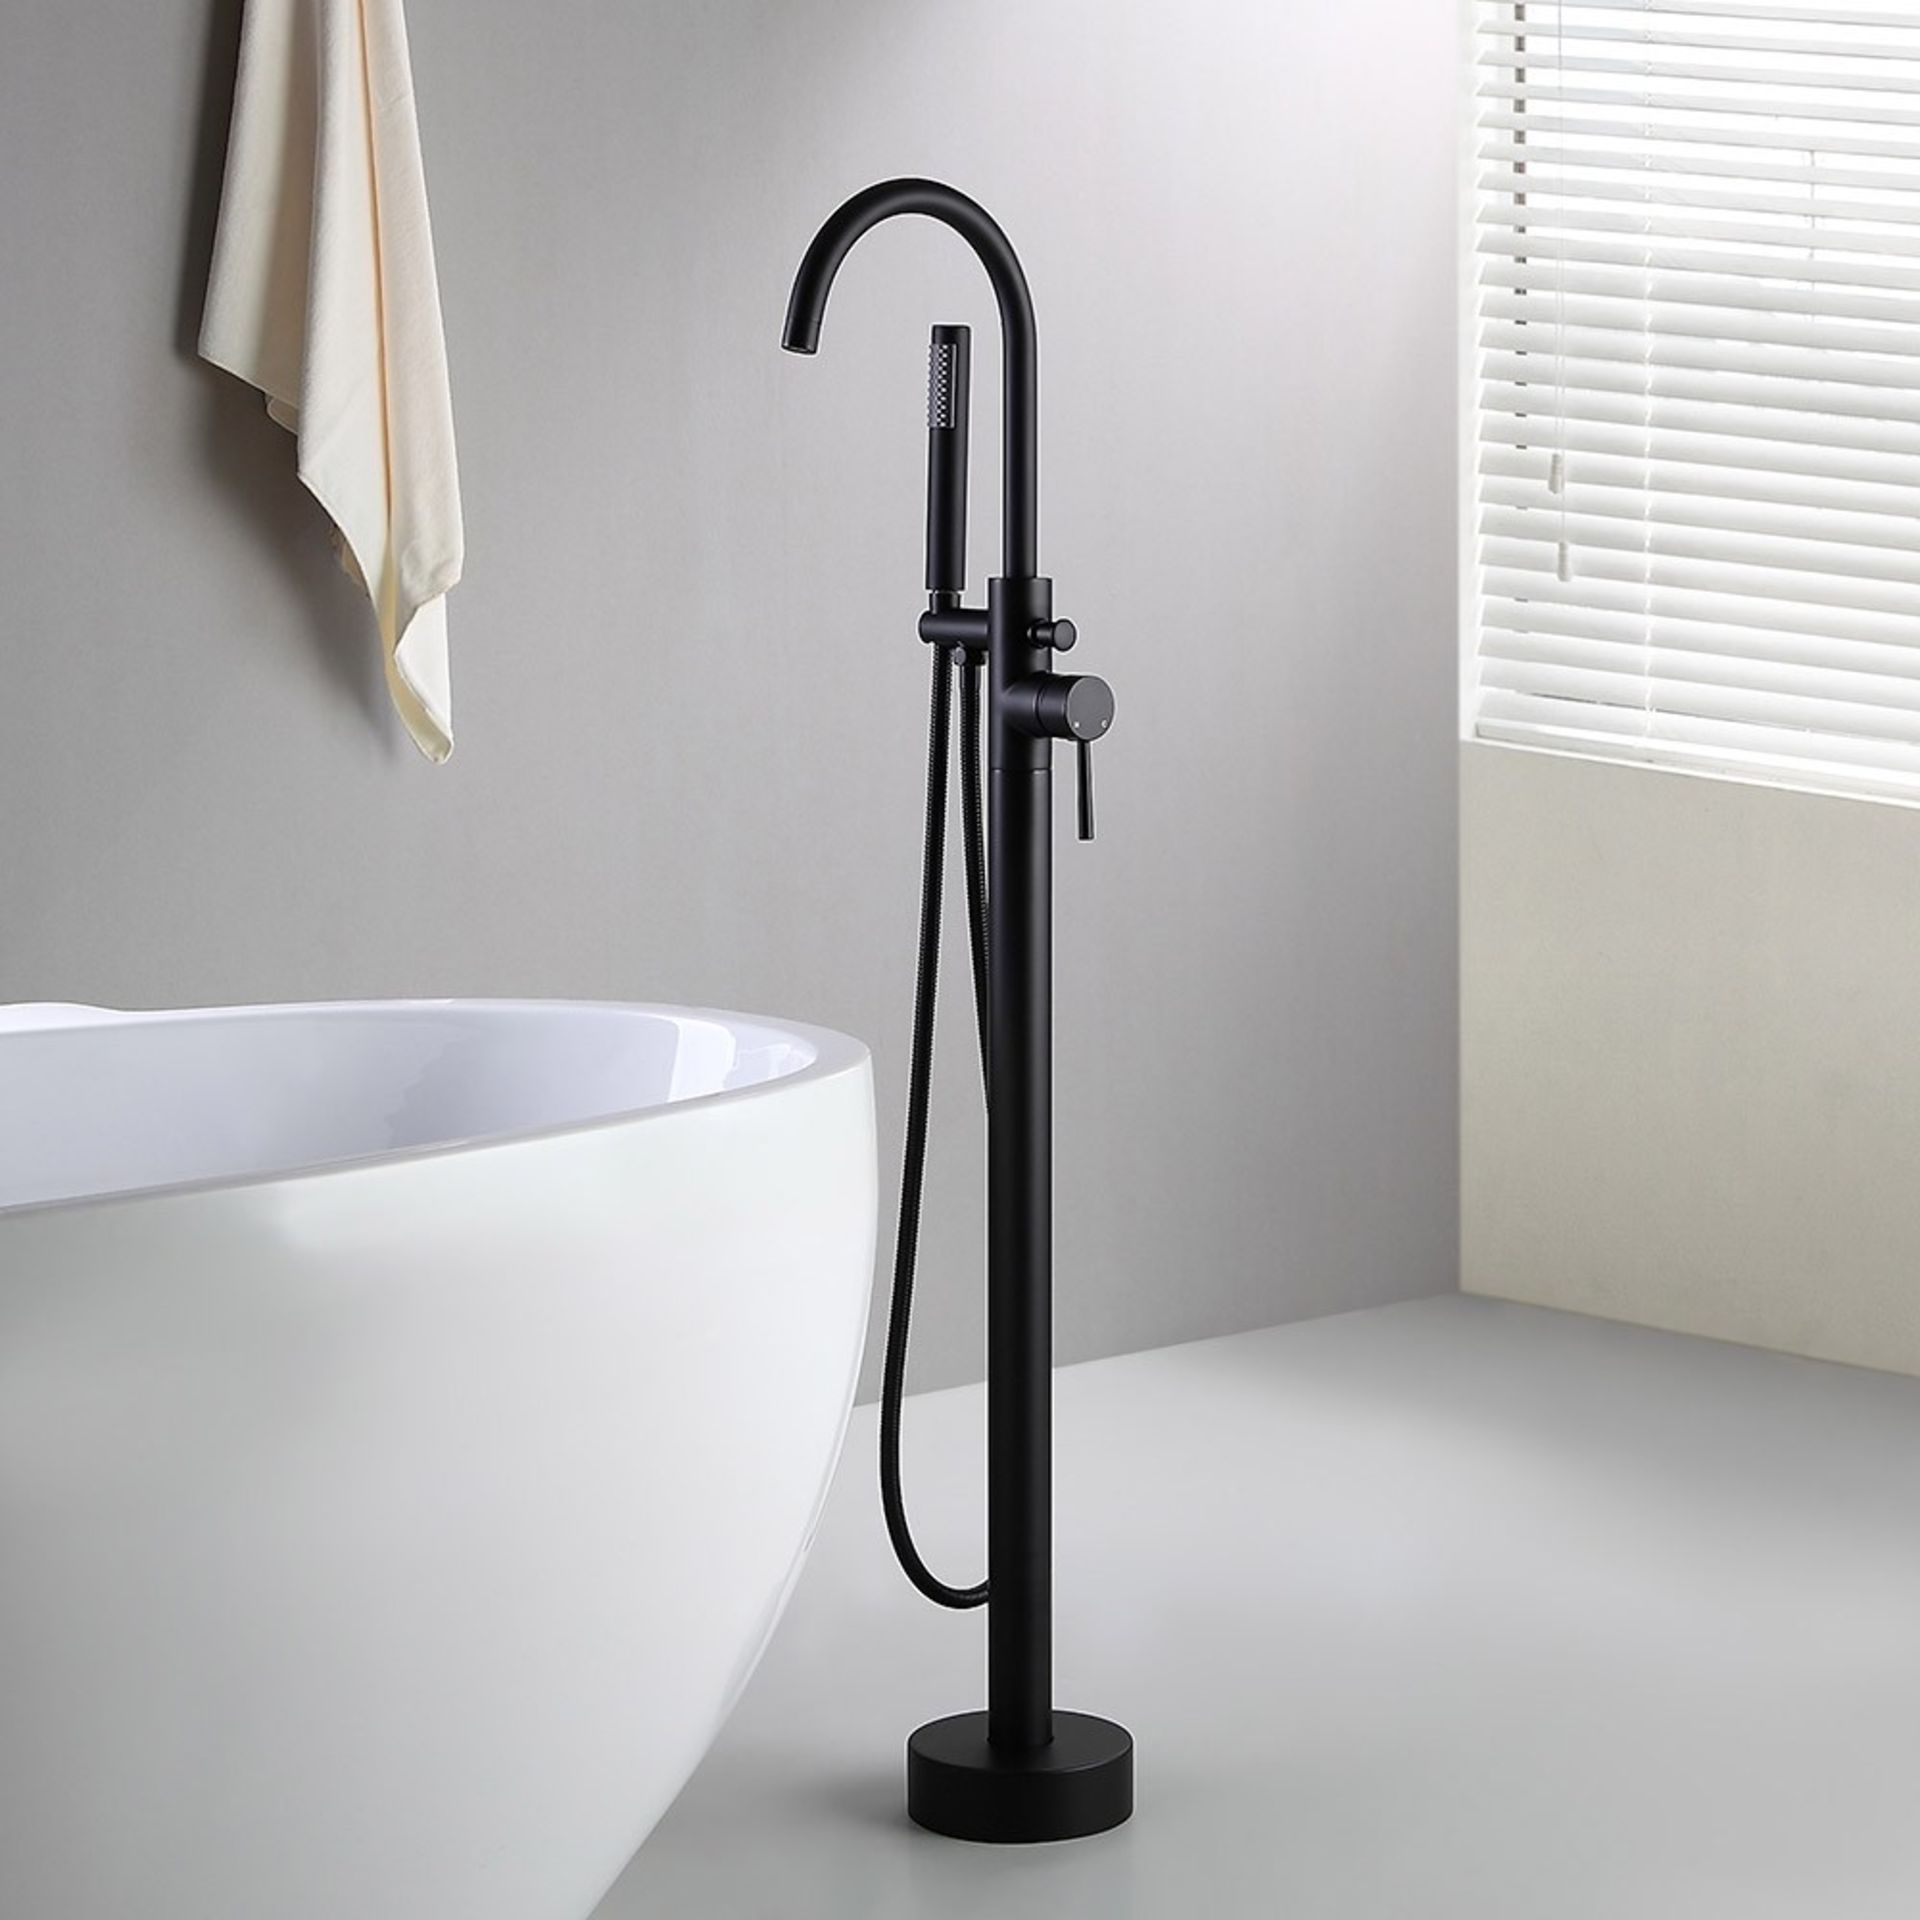 NEW Matte Black Gladstone Freestanding Thermostatic Bath Mixer Tap with Hand Held Shower Head. ... - Image 2 of 3